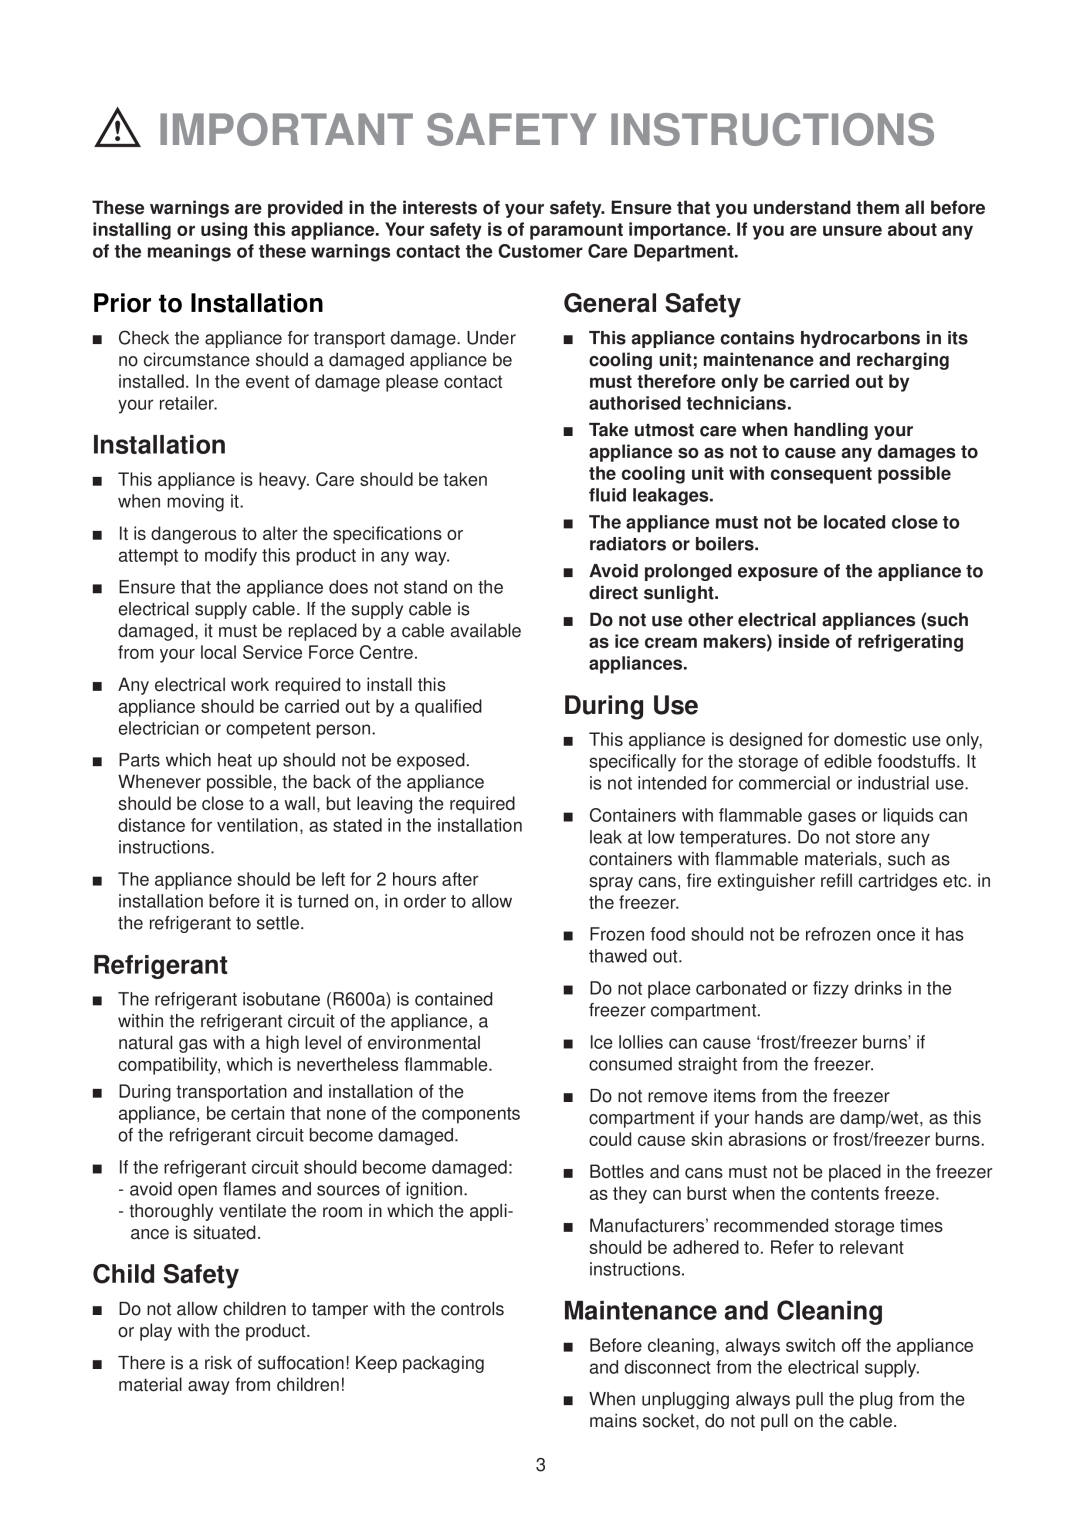 Zanussi ZVR 47 R manual Important Safety Instructions, Prior to Installation, Refrigerant, Child Safety, General Safety 